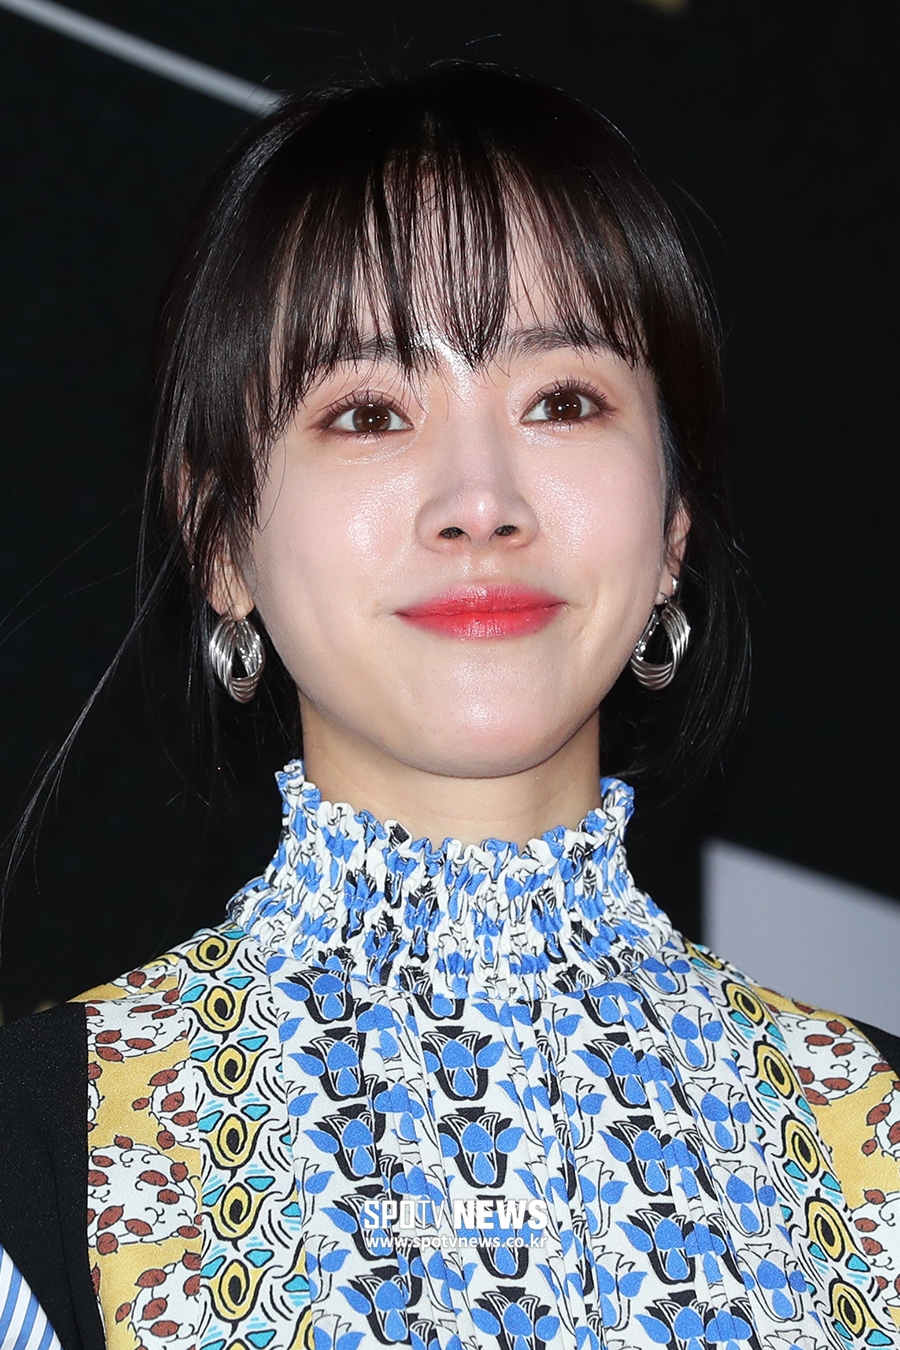 The VIP premiere of the movie Namsans Directors was held at Megabox COEX in Samsung-dong, Gangnam-gu, Seoul on the afternoon of the 20th. Actor Han Ji-min poses.